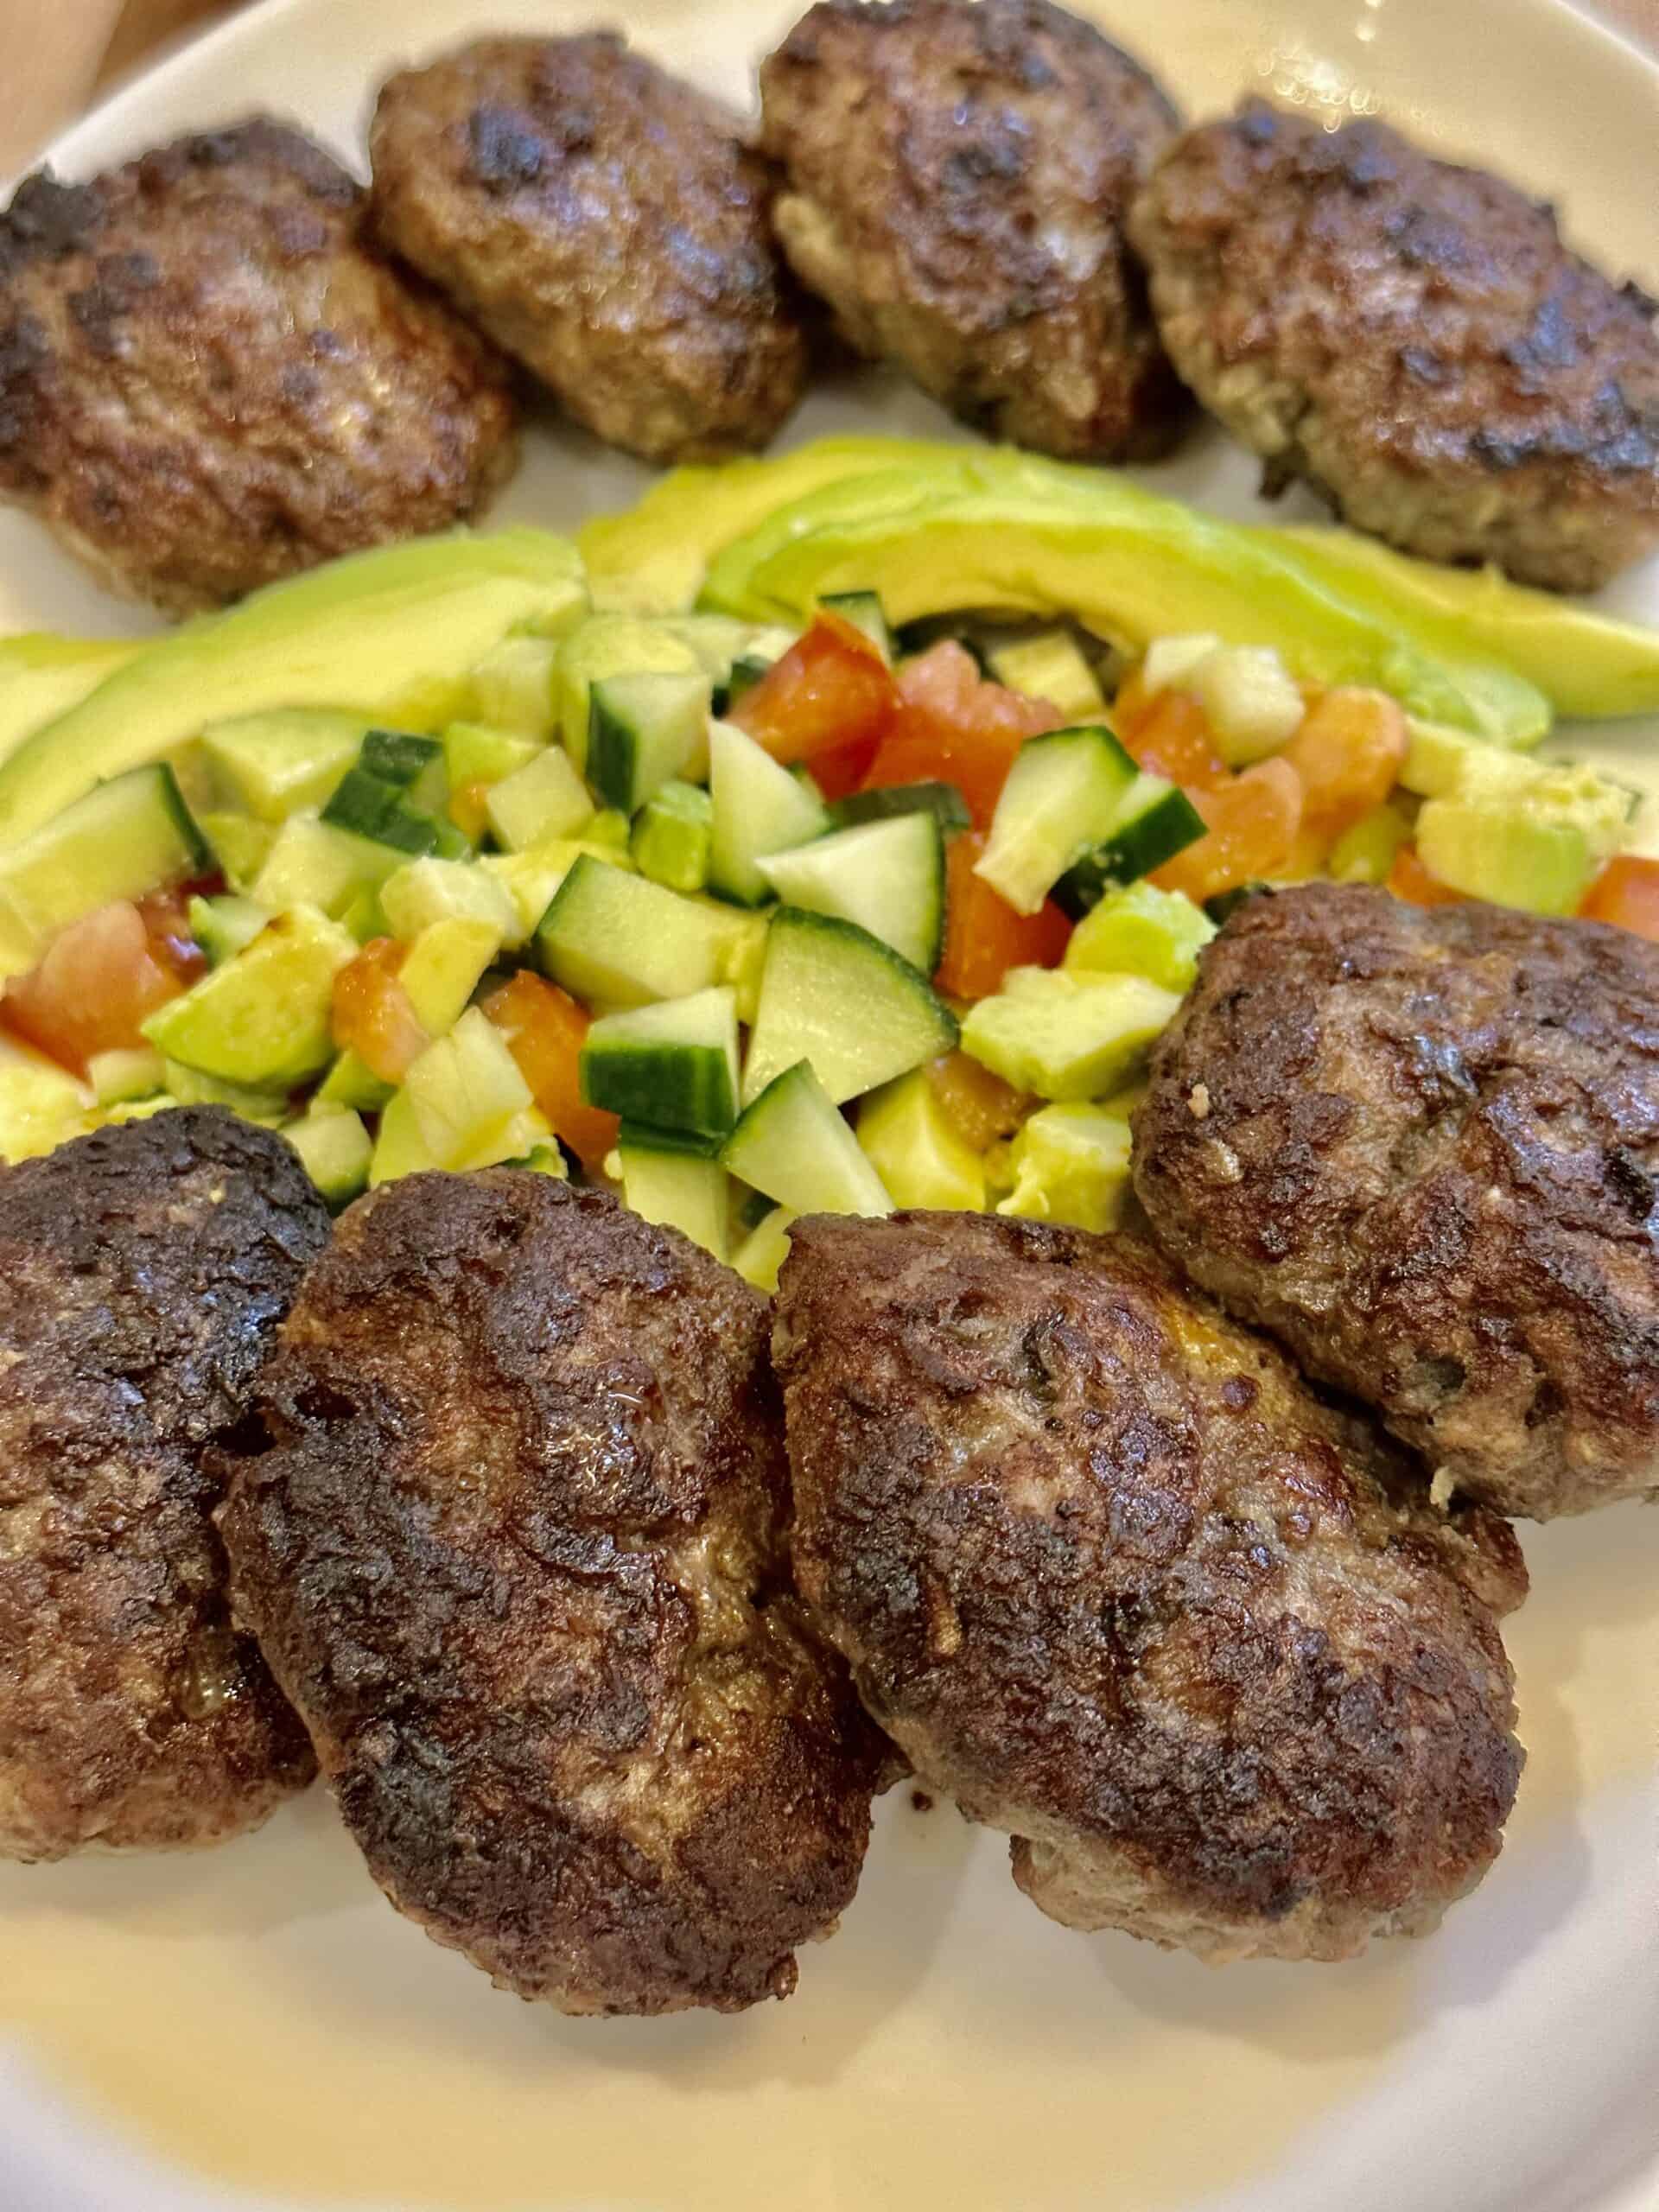 Eight burger patties with fresh avocado salad on a white platter